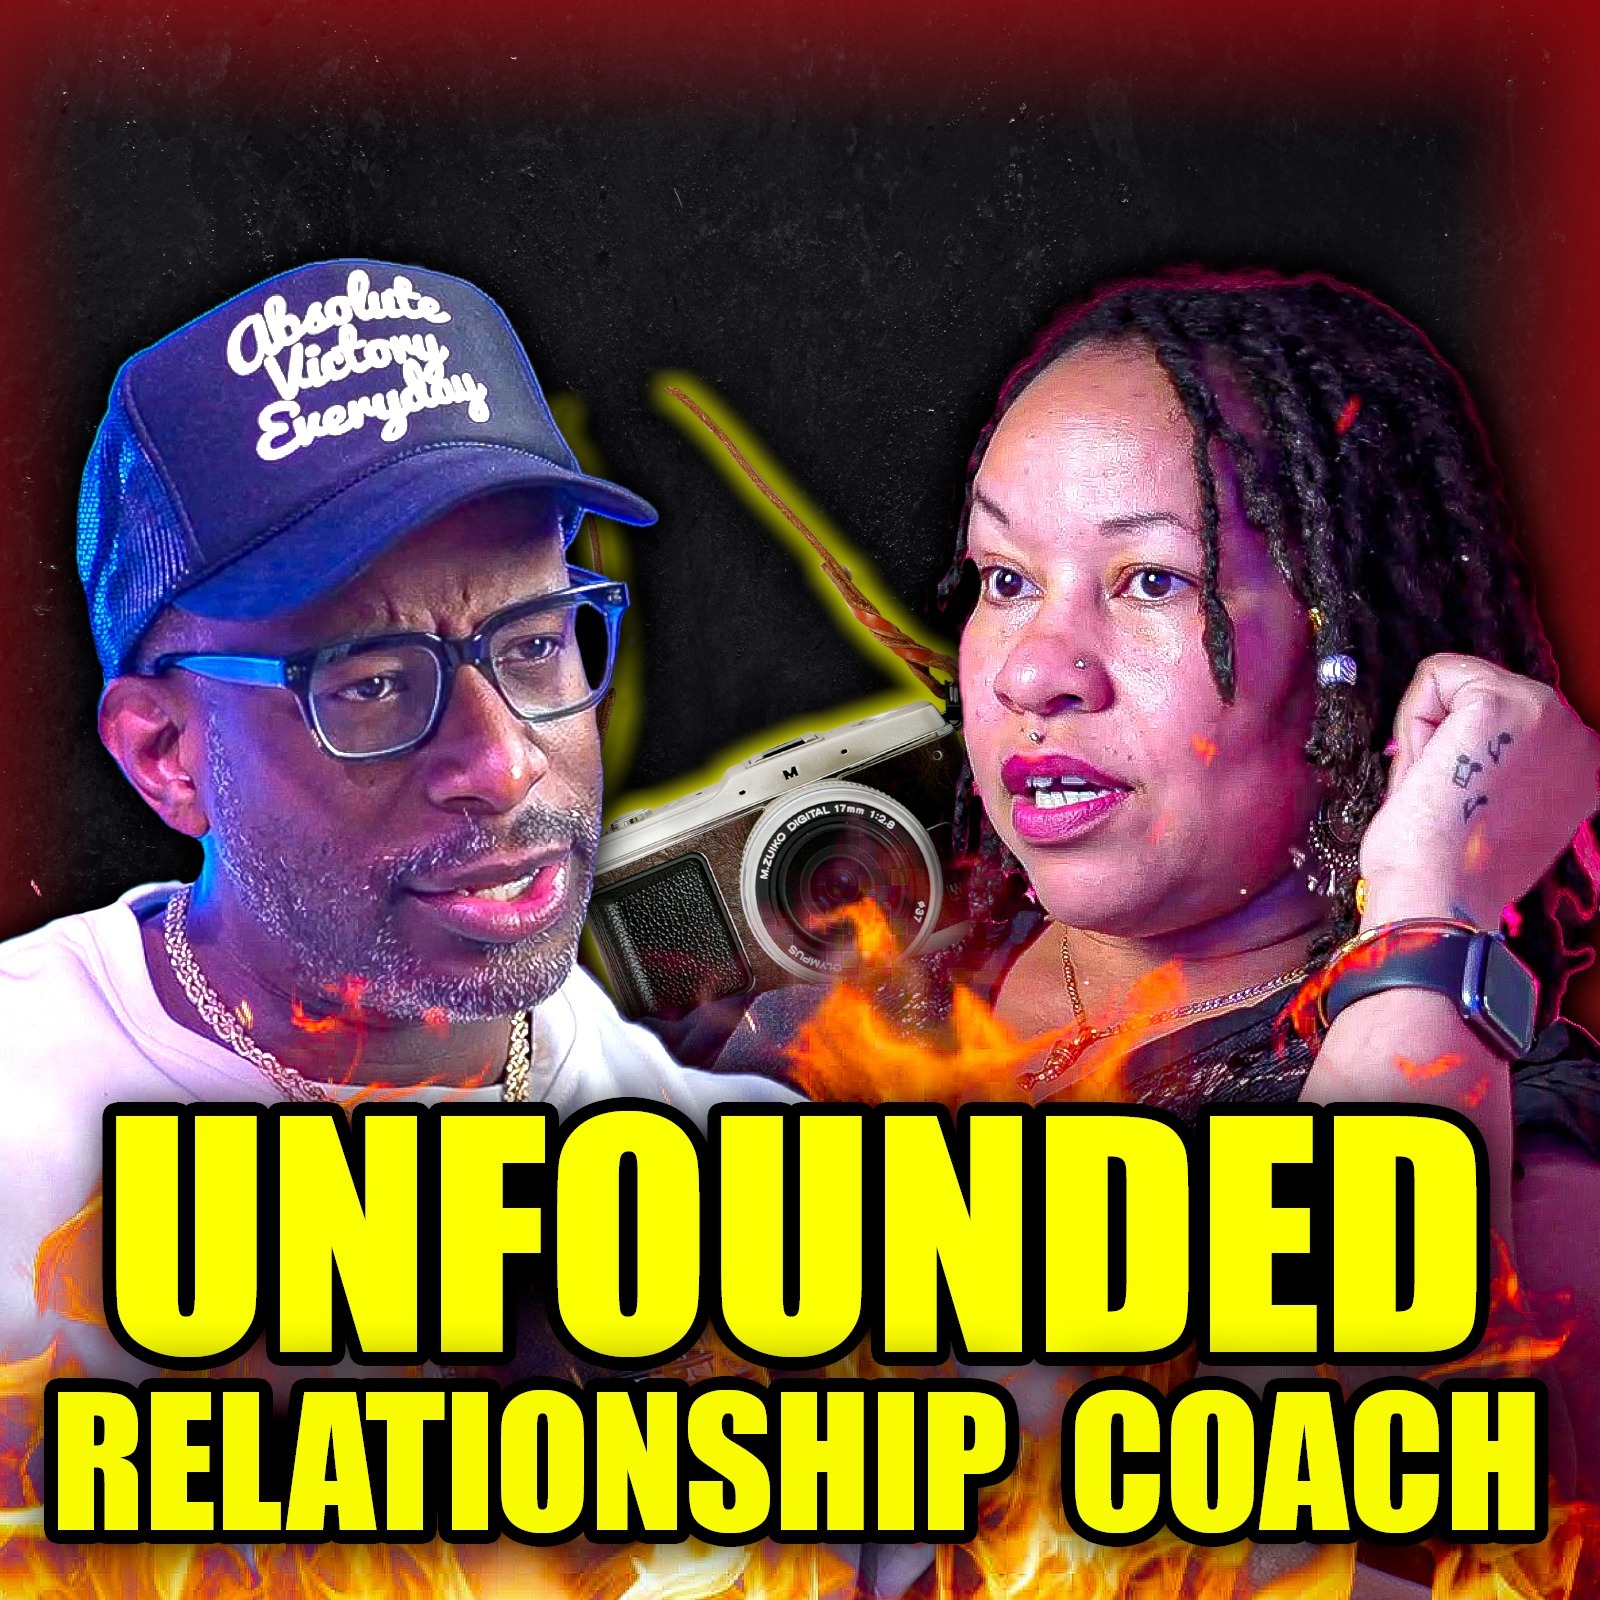 Is She Qualified To Give Relationship Advice? - Social Proof Hot Seat #46